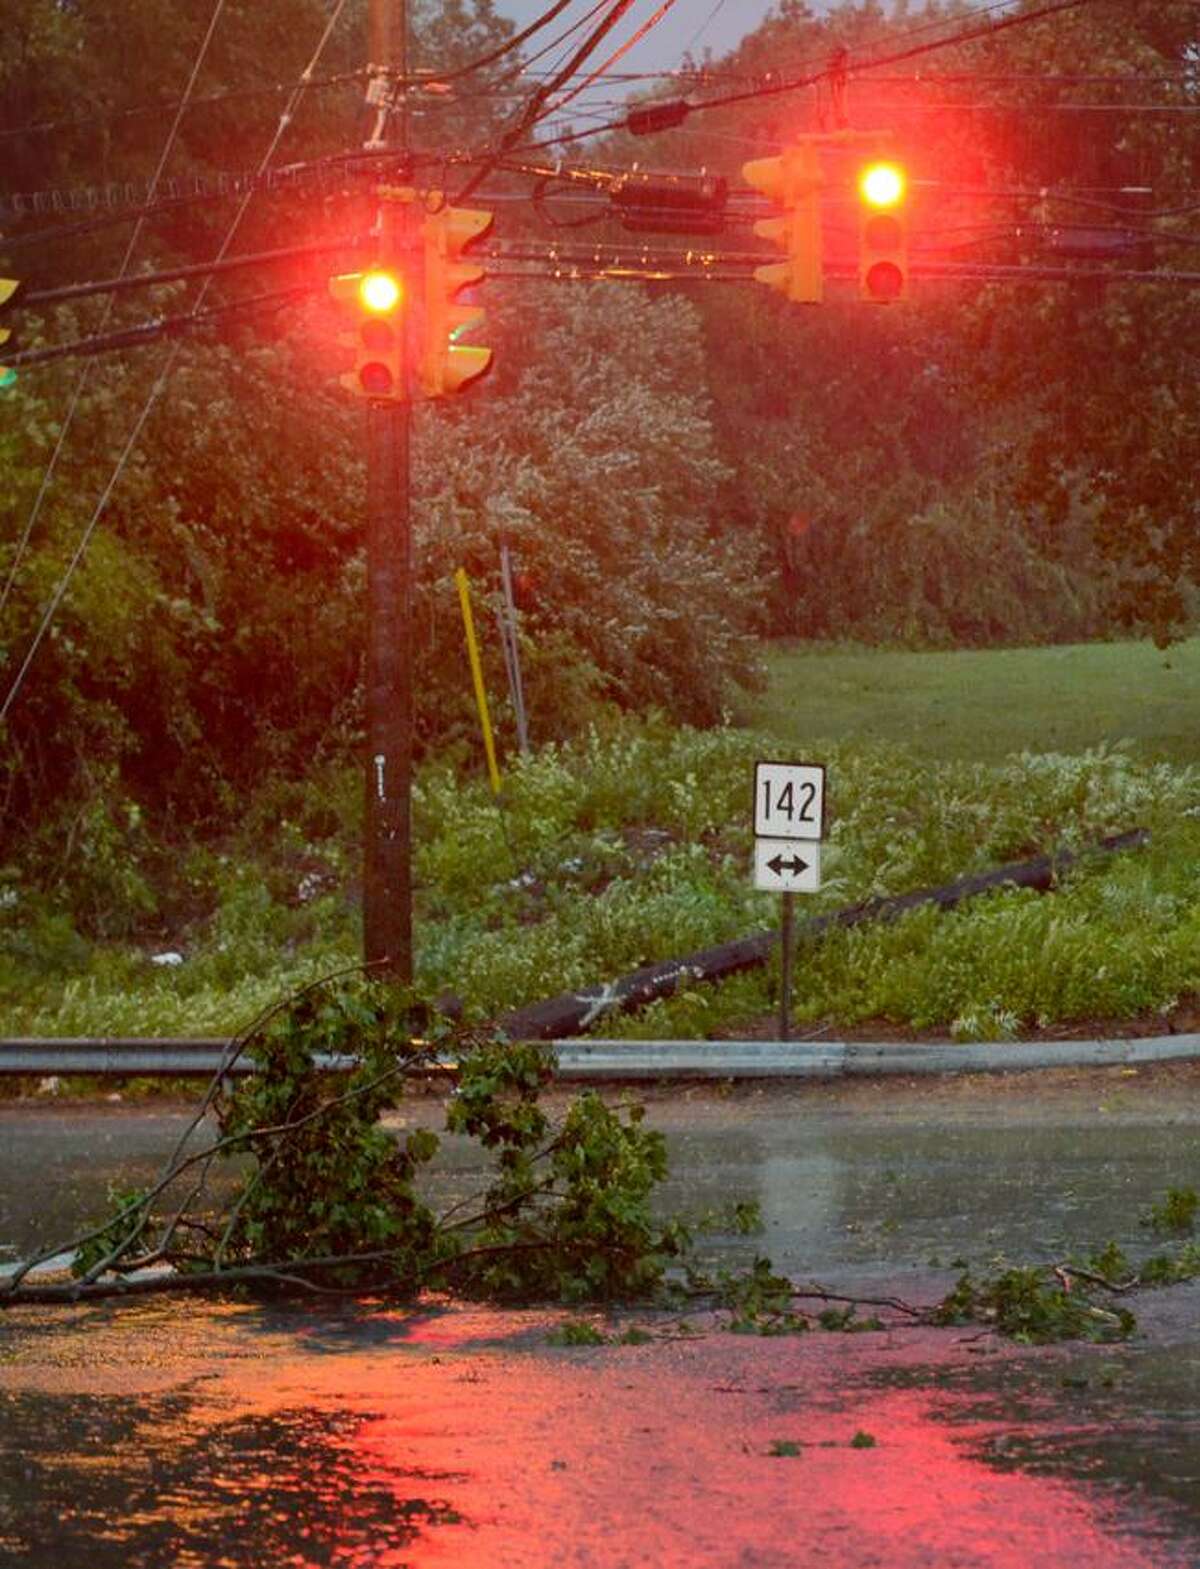 Tree branch down in the road at the intersection of Short Beach Rd and Stannard street in Branford during the early morning hours of Hurricane Irene. VM Williams